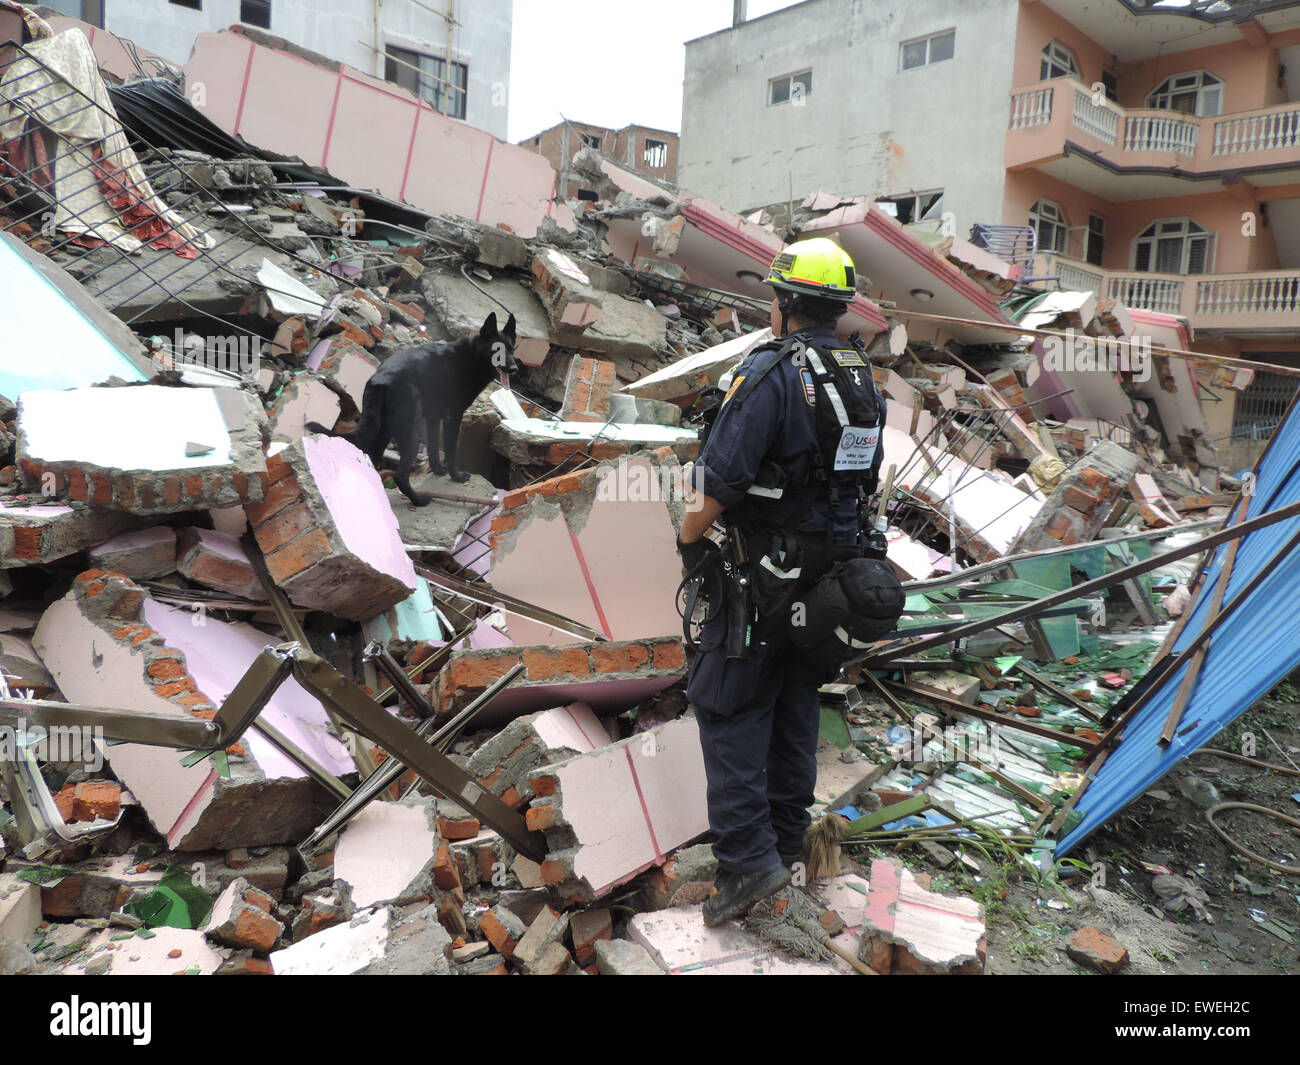 USAID Disaster Assistance Response Team (DART) member and canine with Fairfax, Viginia Urban Search and Rescue, search a collapsed structure in Bhaktapur, Nepal while assisting with U.S. response efforts in the aftermath of the magnitude 7.8 earthquake that struck central Nepal, on April 25th, affecting more than 8 million people and causing widespread damage and destruction. [Fairfax Co Fire &amp; Rescue] Stock Photo